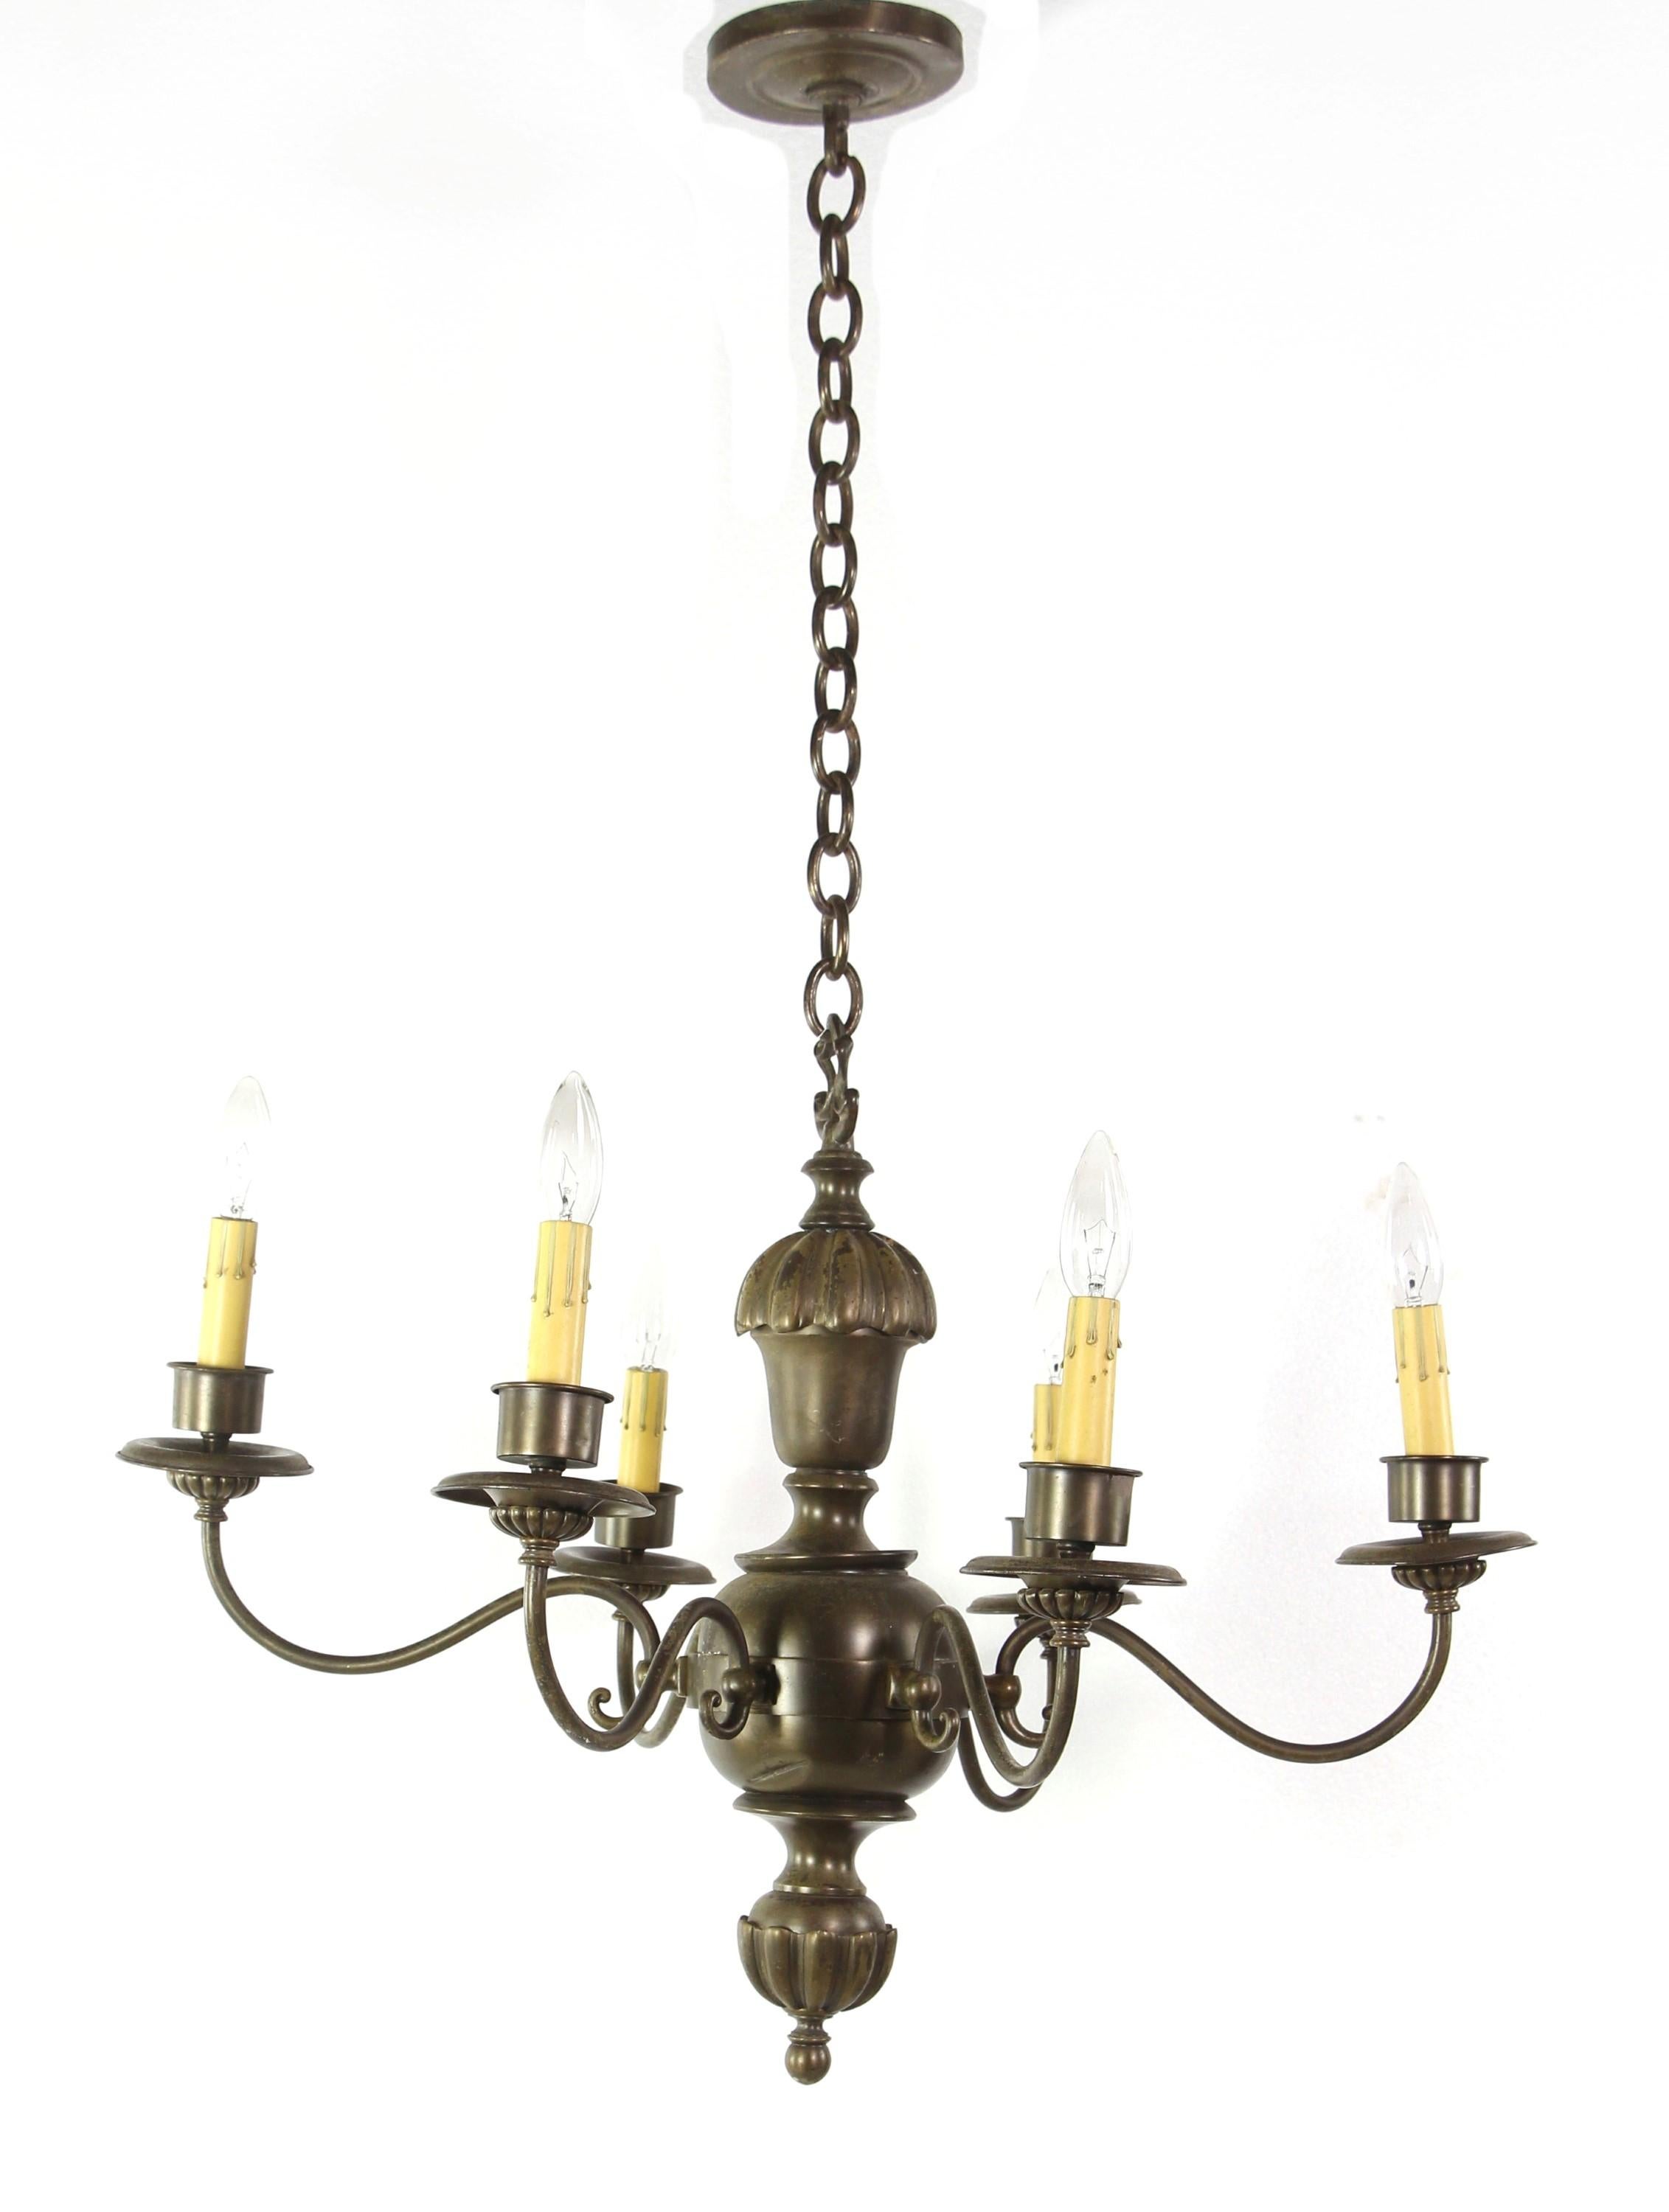 Six candlestick arm Georgian style chandelier with a dark brass patina. The chandelier is graced with fluted cast brass detail. Cleaned and restored. Takes six candelabra size light bulbs. Please note, this item is located in our Scranton, PA